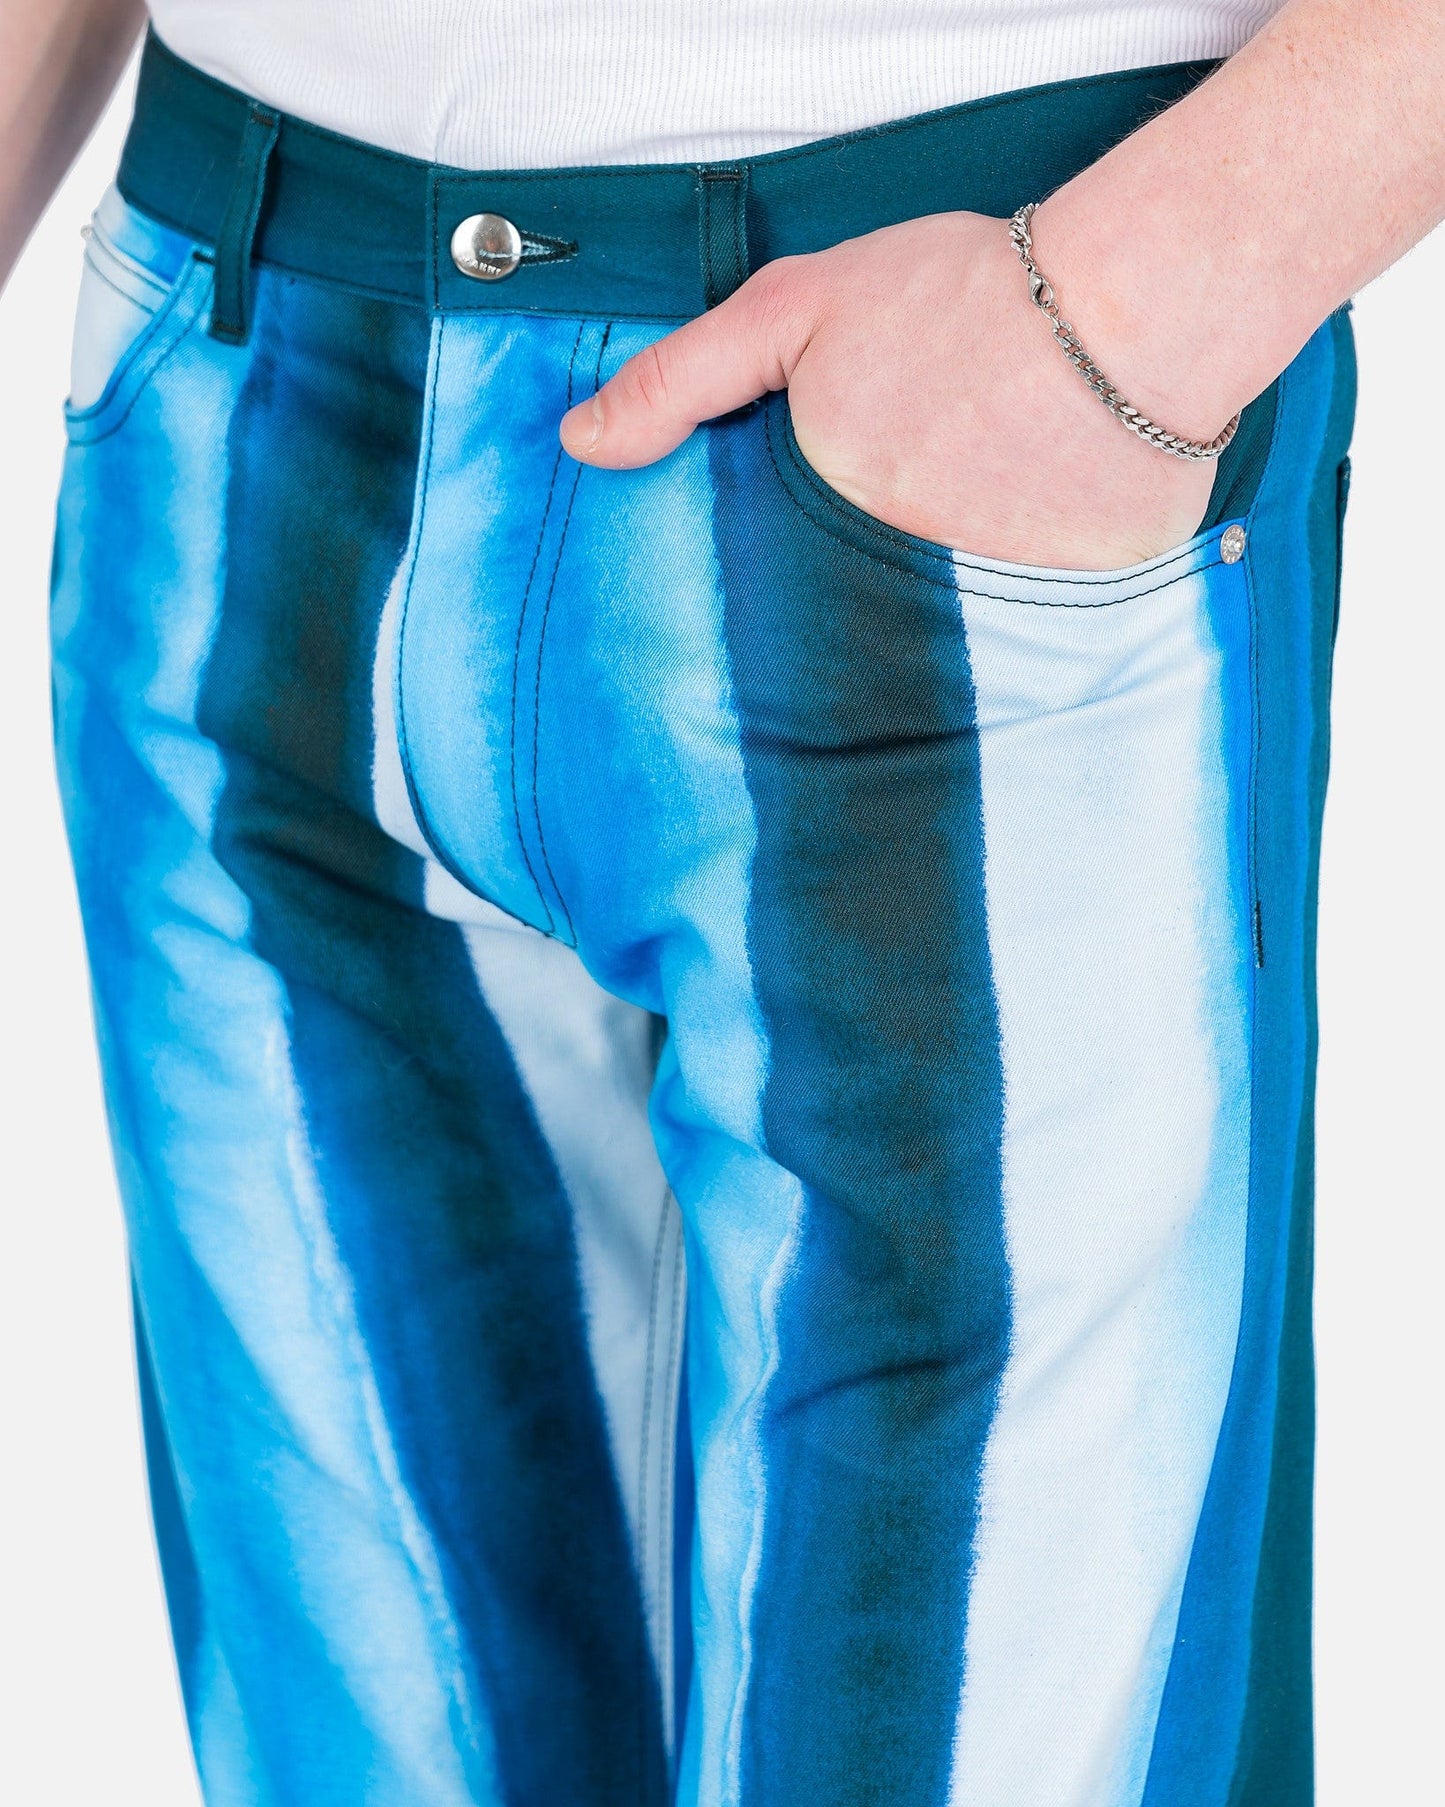 Marni Men's Jeans Waterfall Striped Drill Pants in Royal